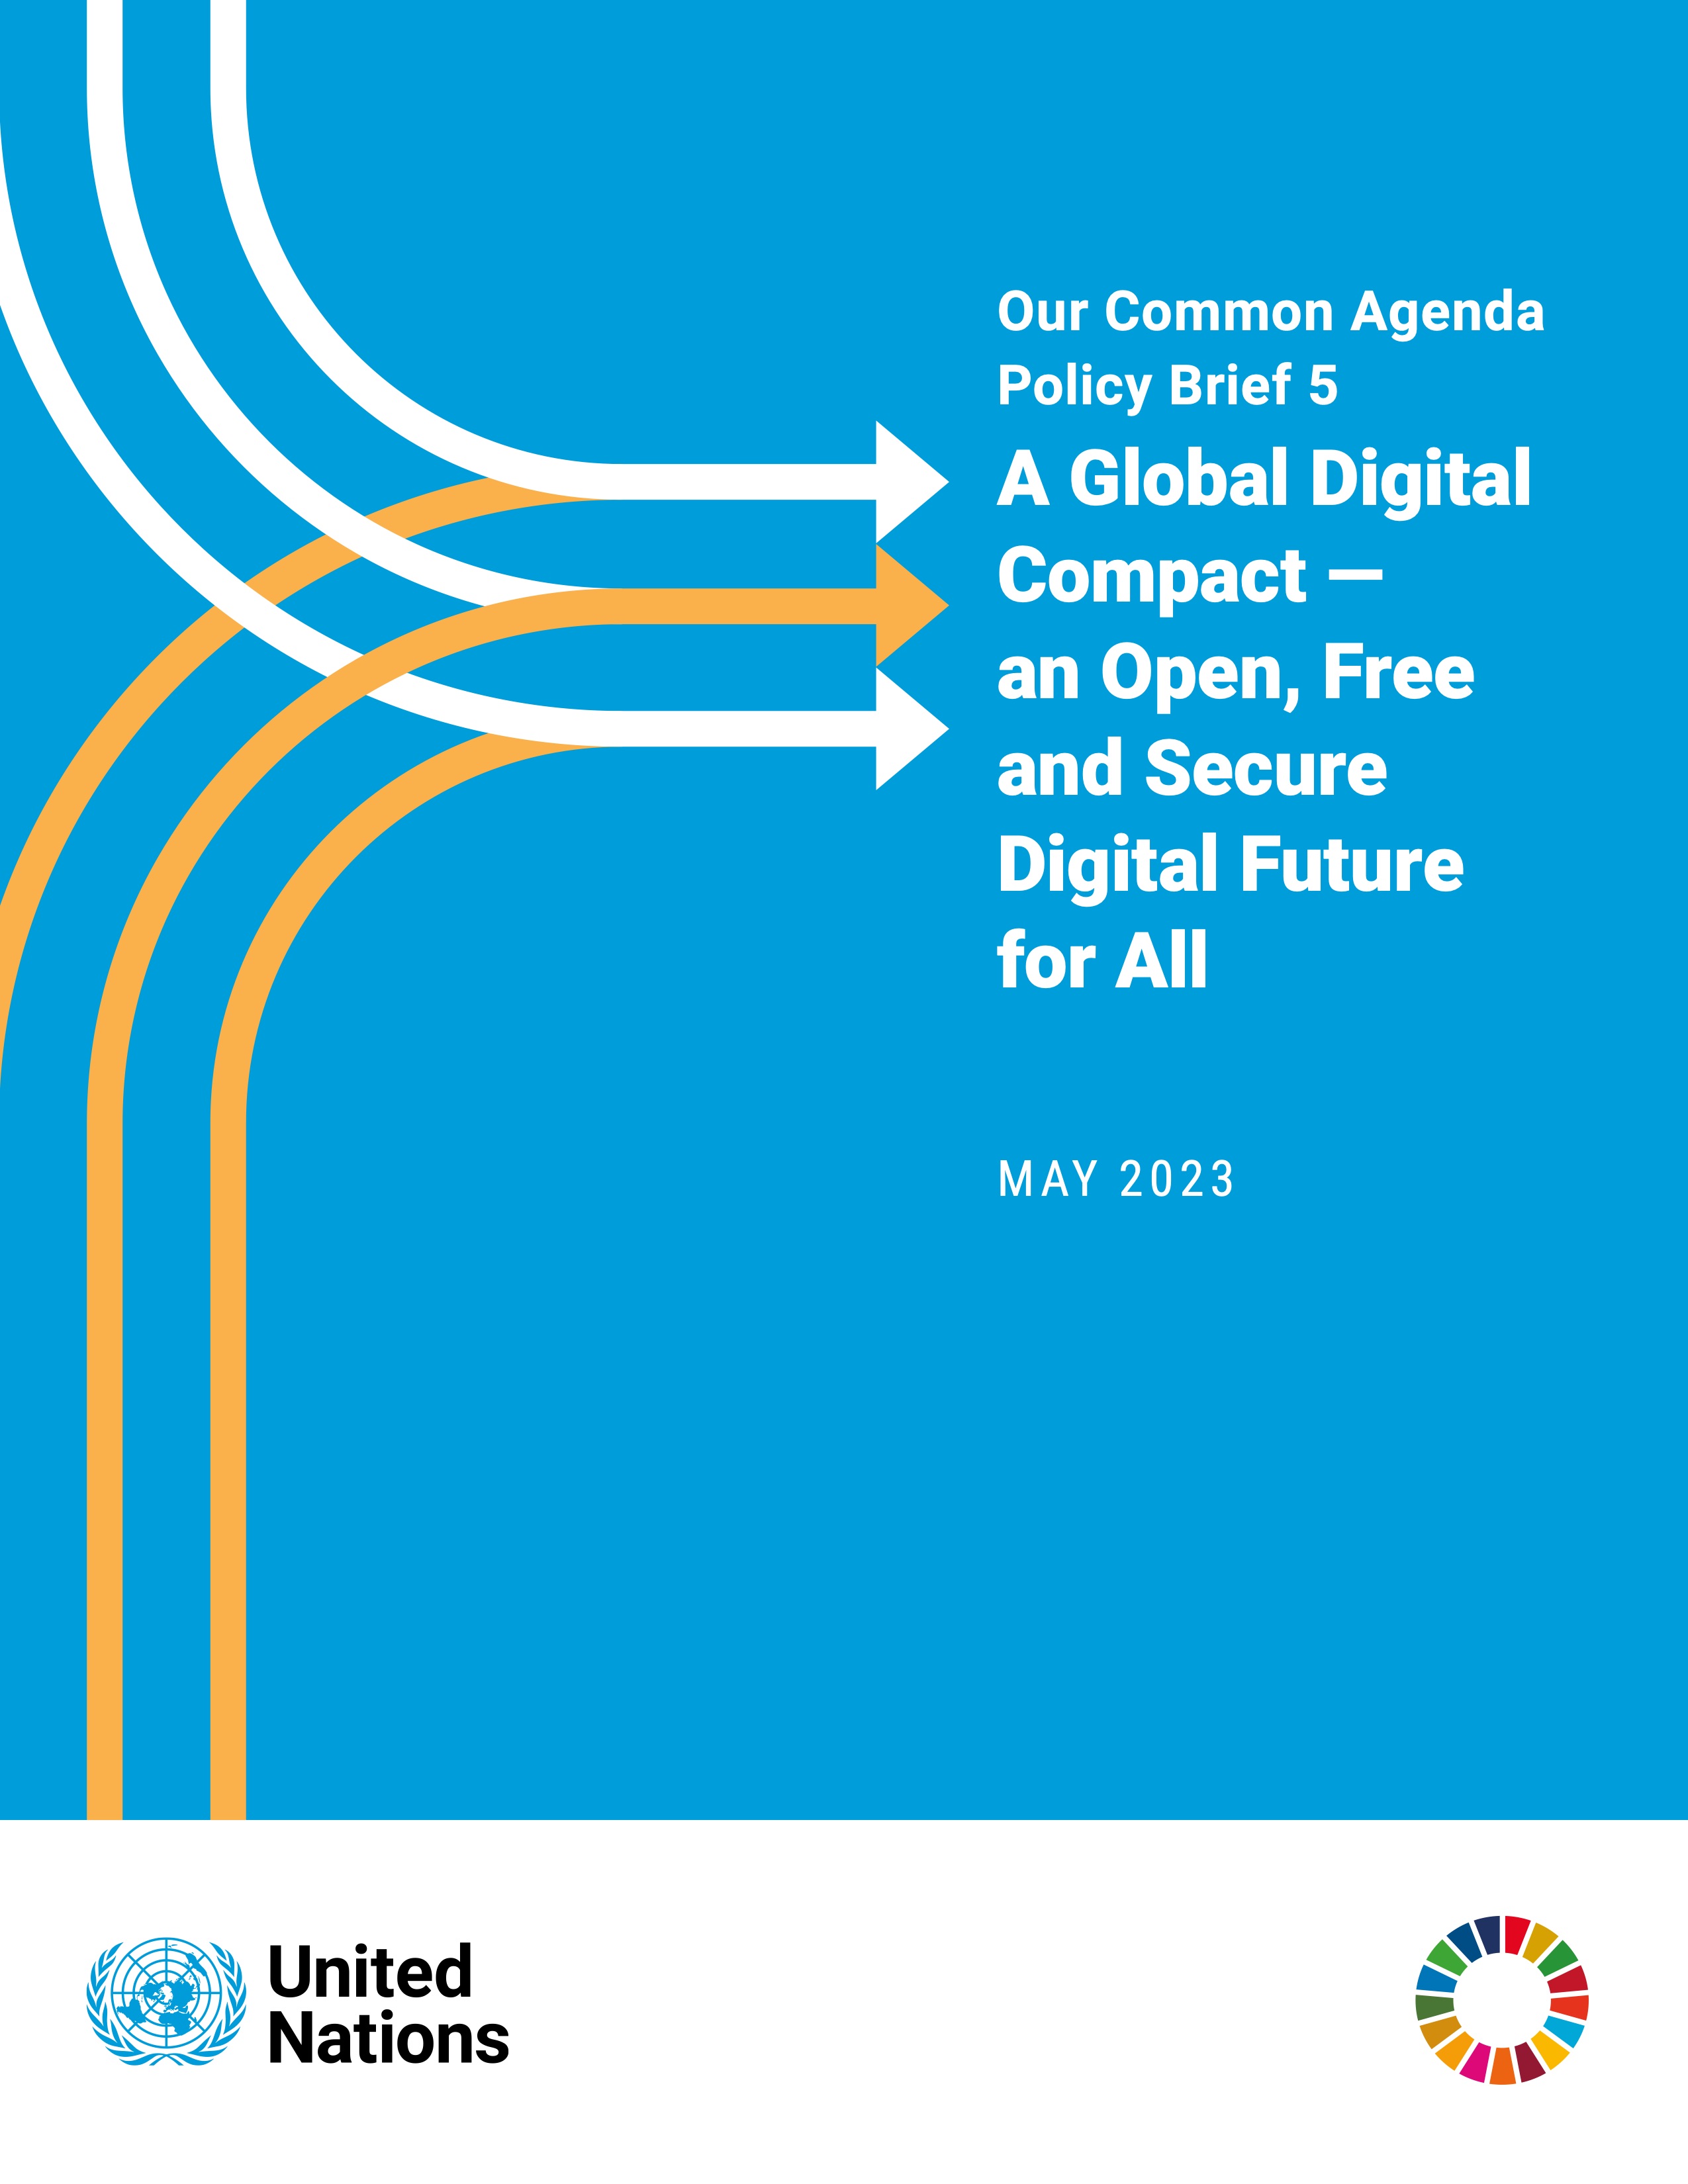 A Global Digital Compact – an Open, Free and Secure Digital Future for All